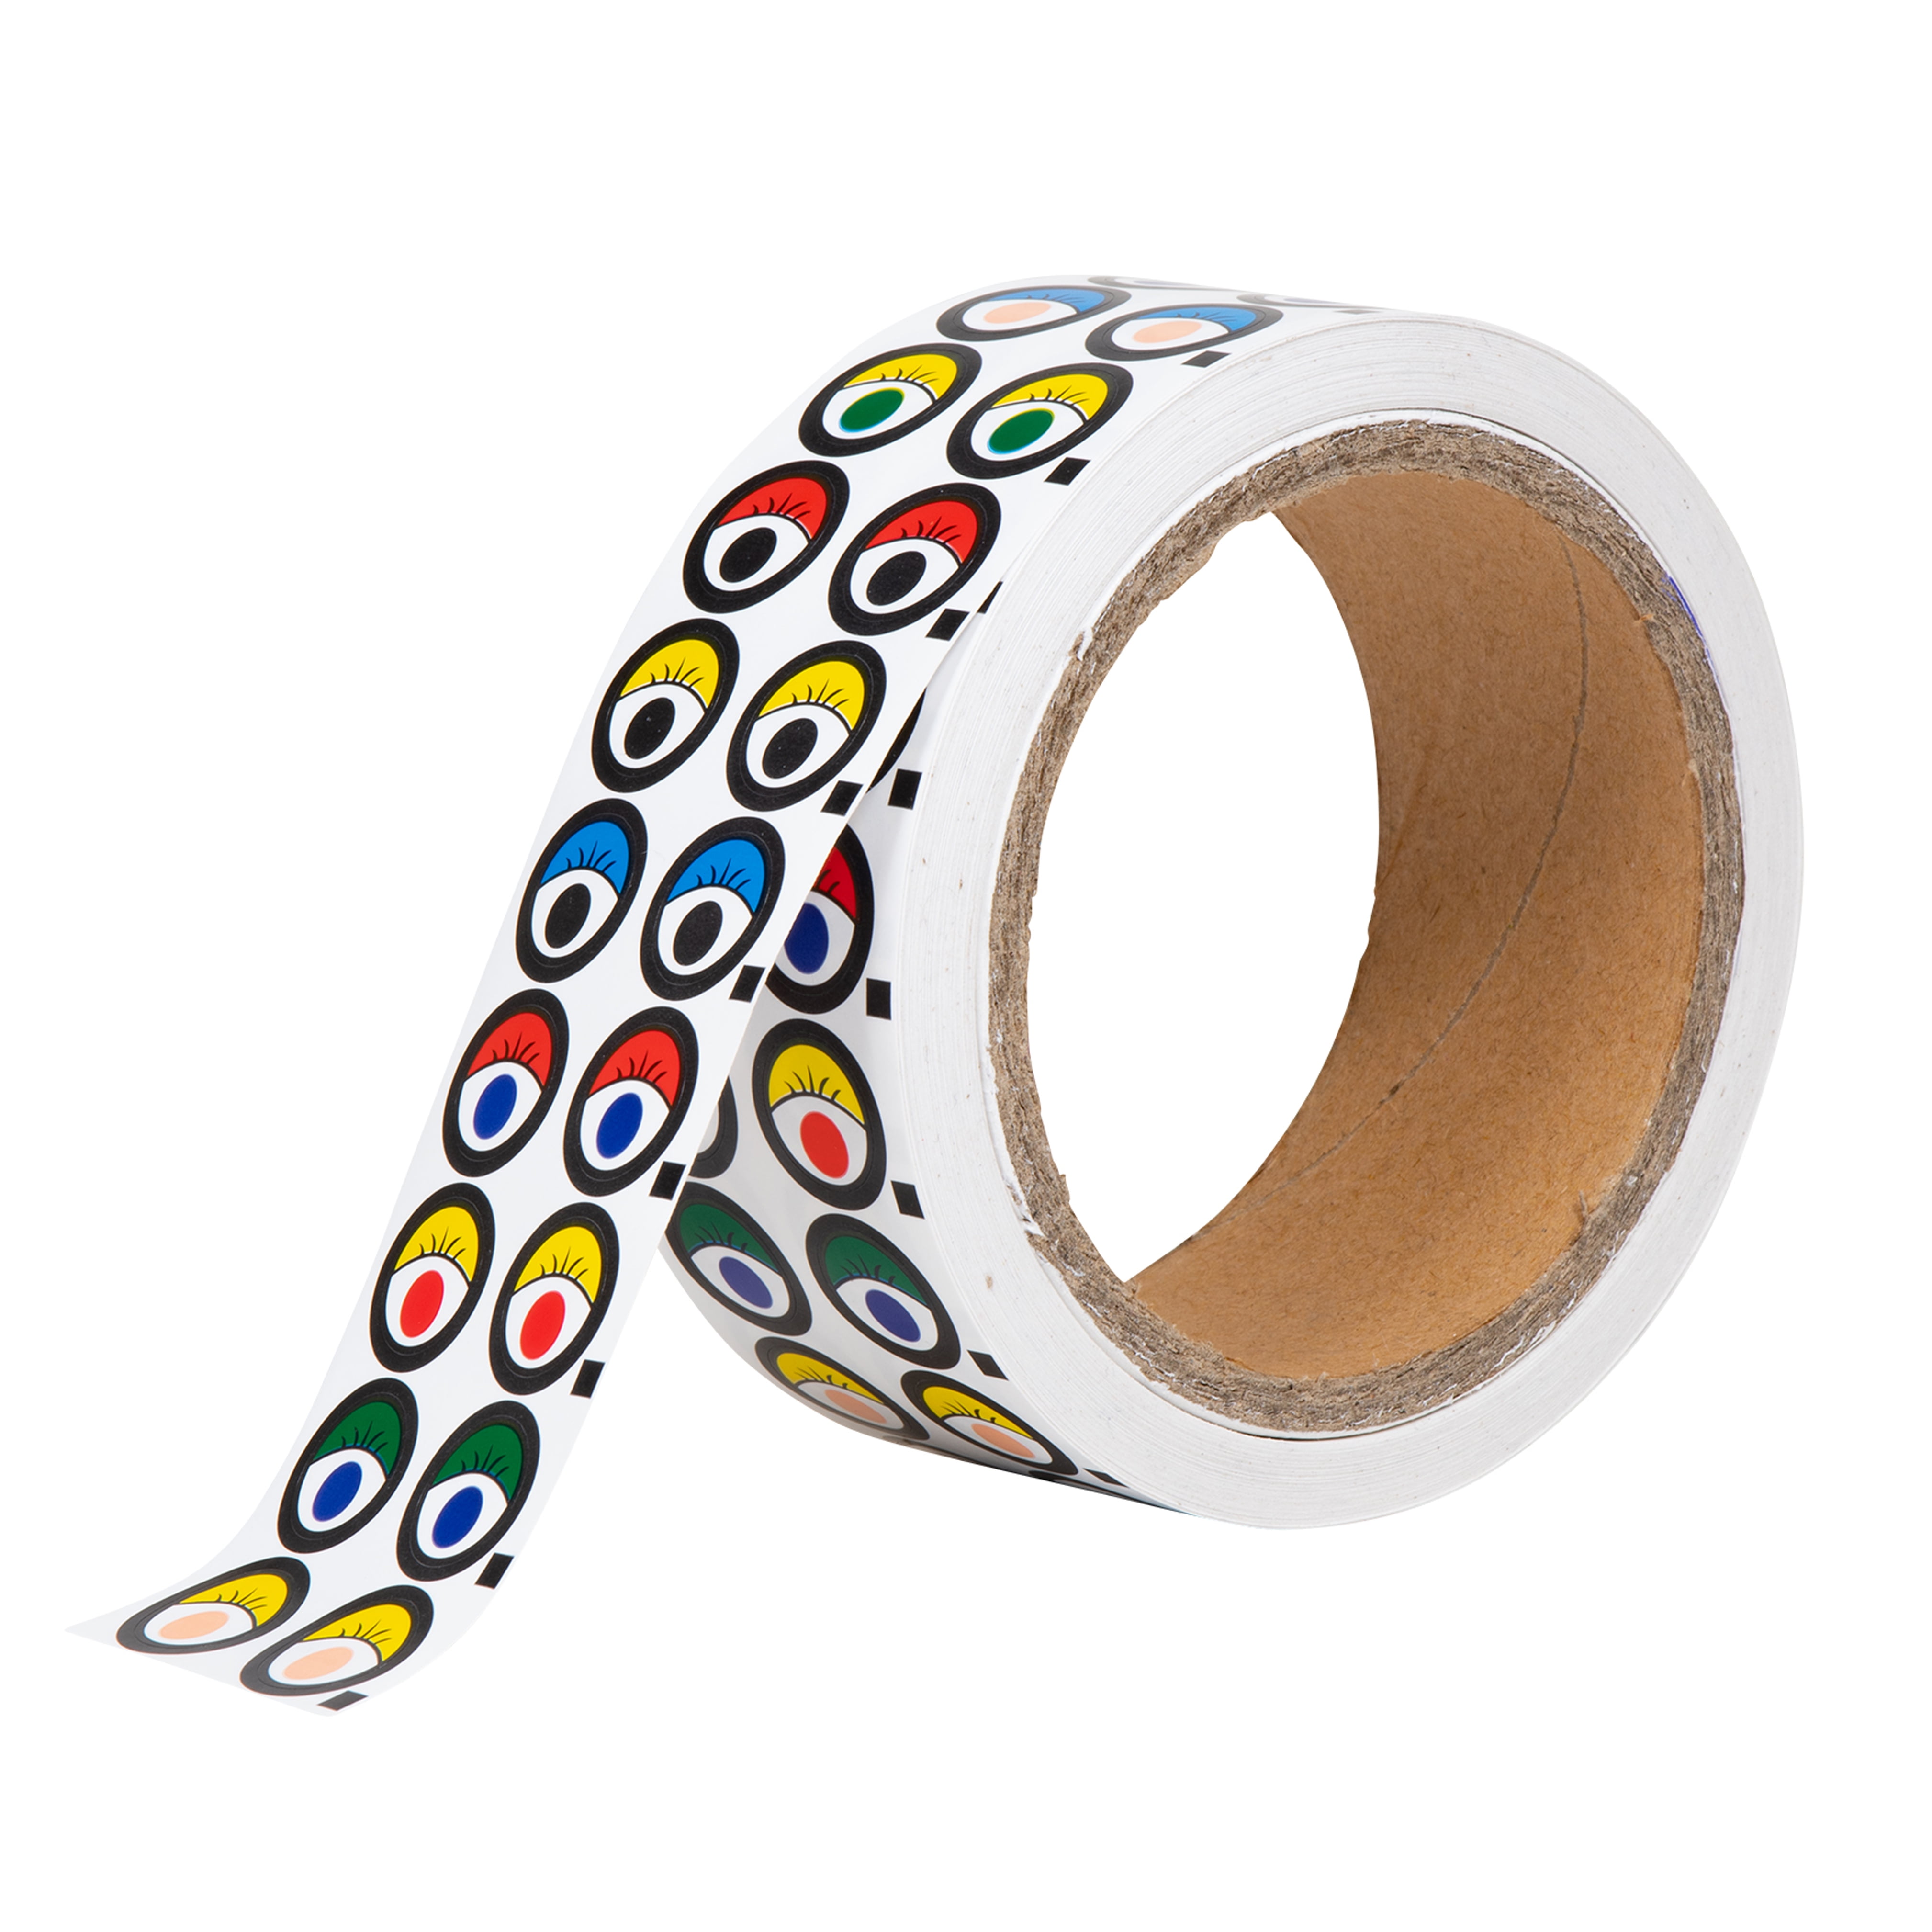 2 Rolls of Colorful Eye Stickers for Crafts Stick - Handmade DIY Decor